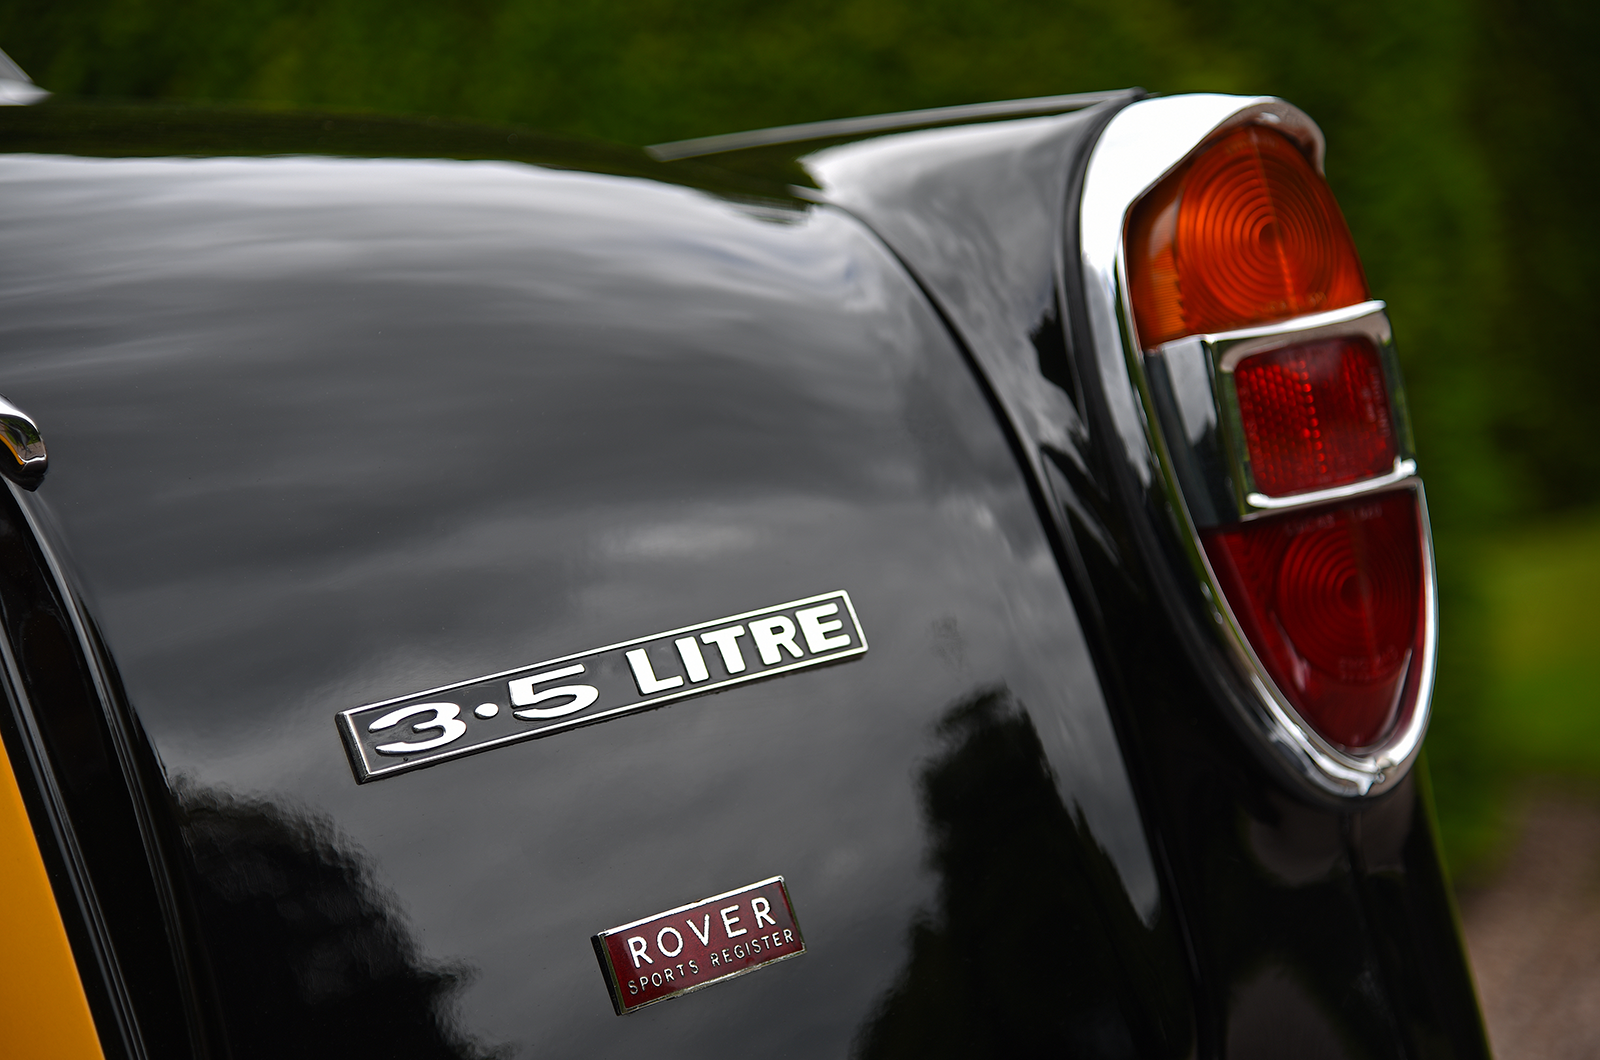 Classic & Sports Car – Rover P5B: yes, Prime Minister